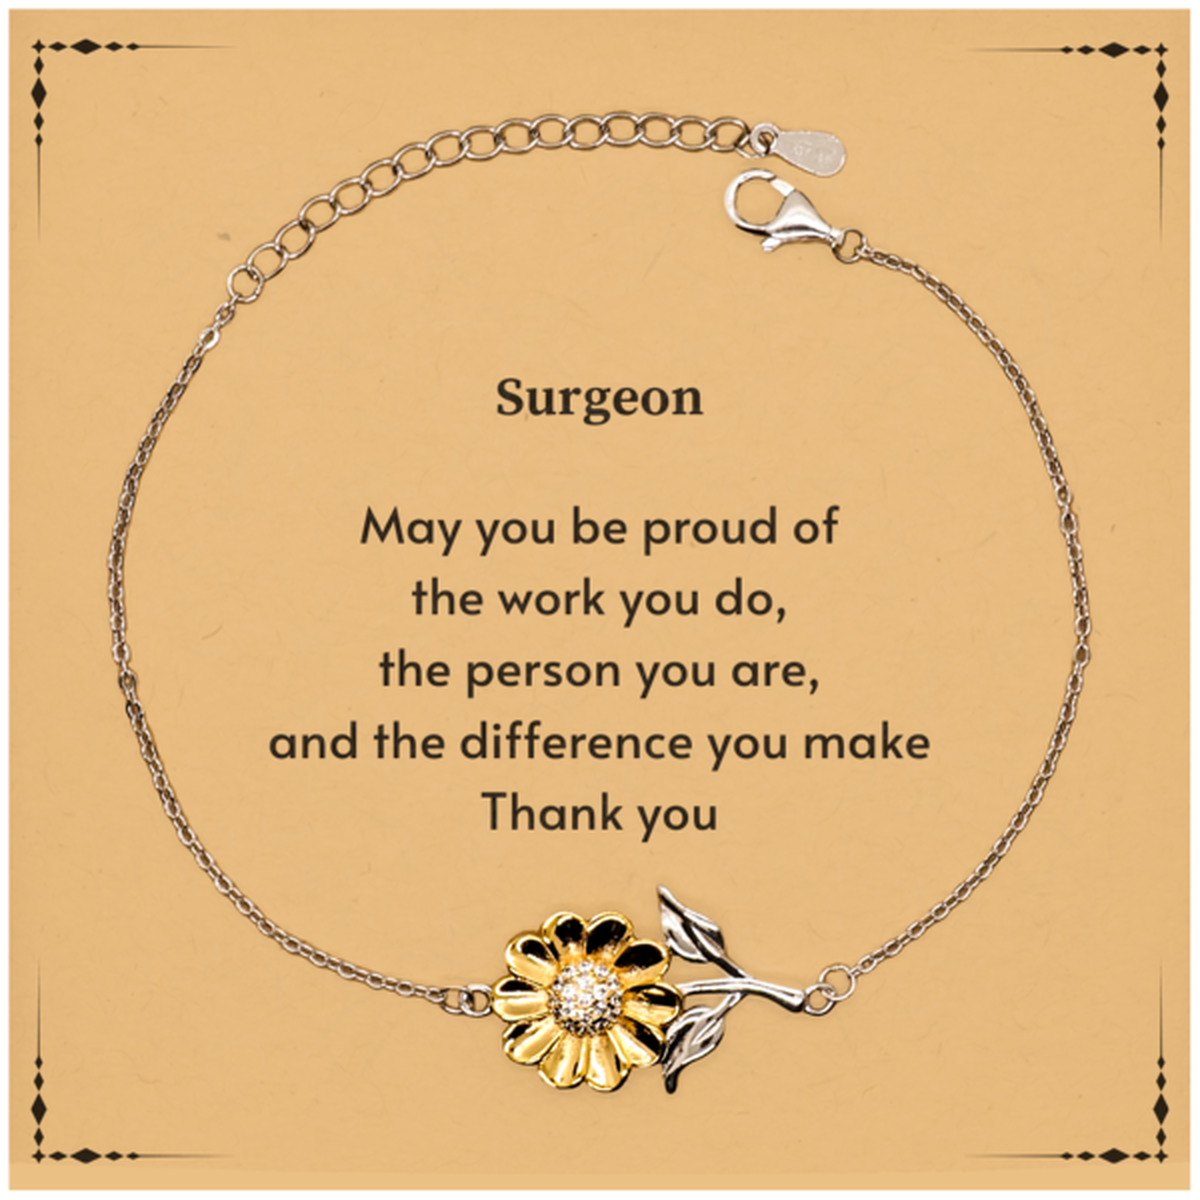 Heartwarming Sunflower Bracelet Retirement Coworkers Gifts for Surgeon, Surgeon May You be proud of the work you do, the person you are Gifts for Boss Men Women Friends